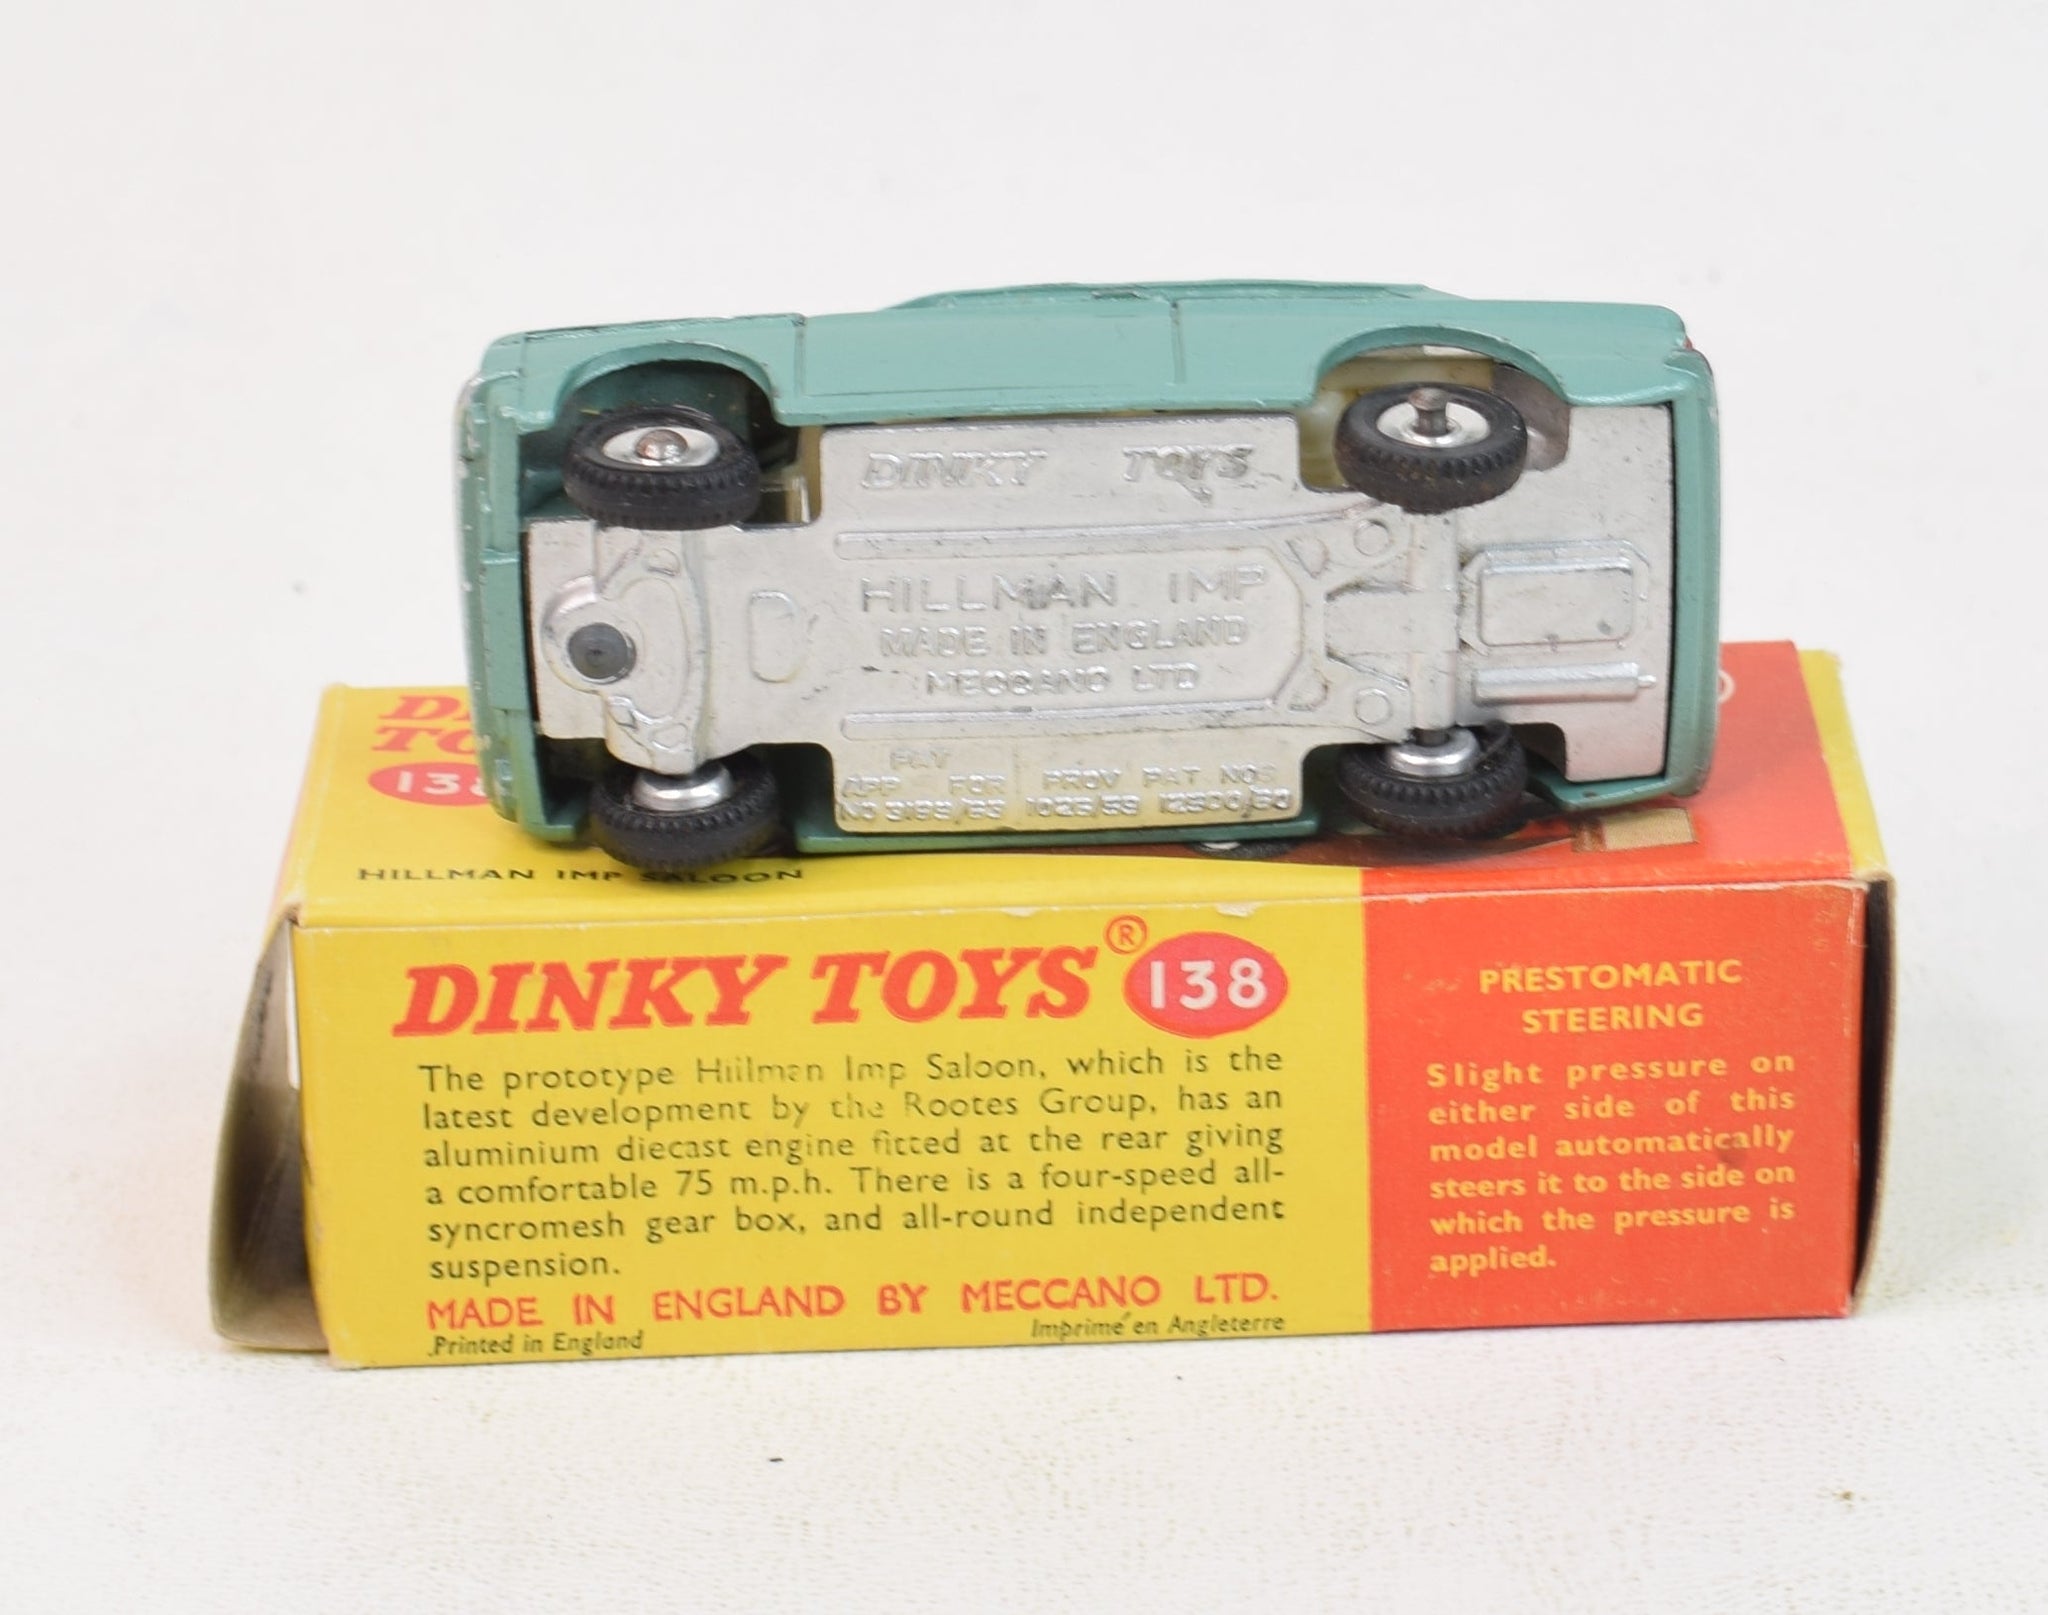 Dinky toys 138 Hillman Imp Very Near Mint/Boxed (Off white 